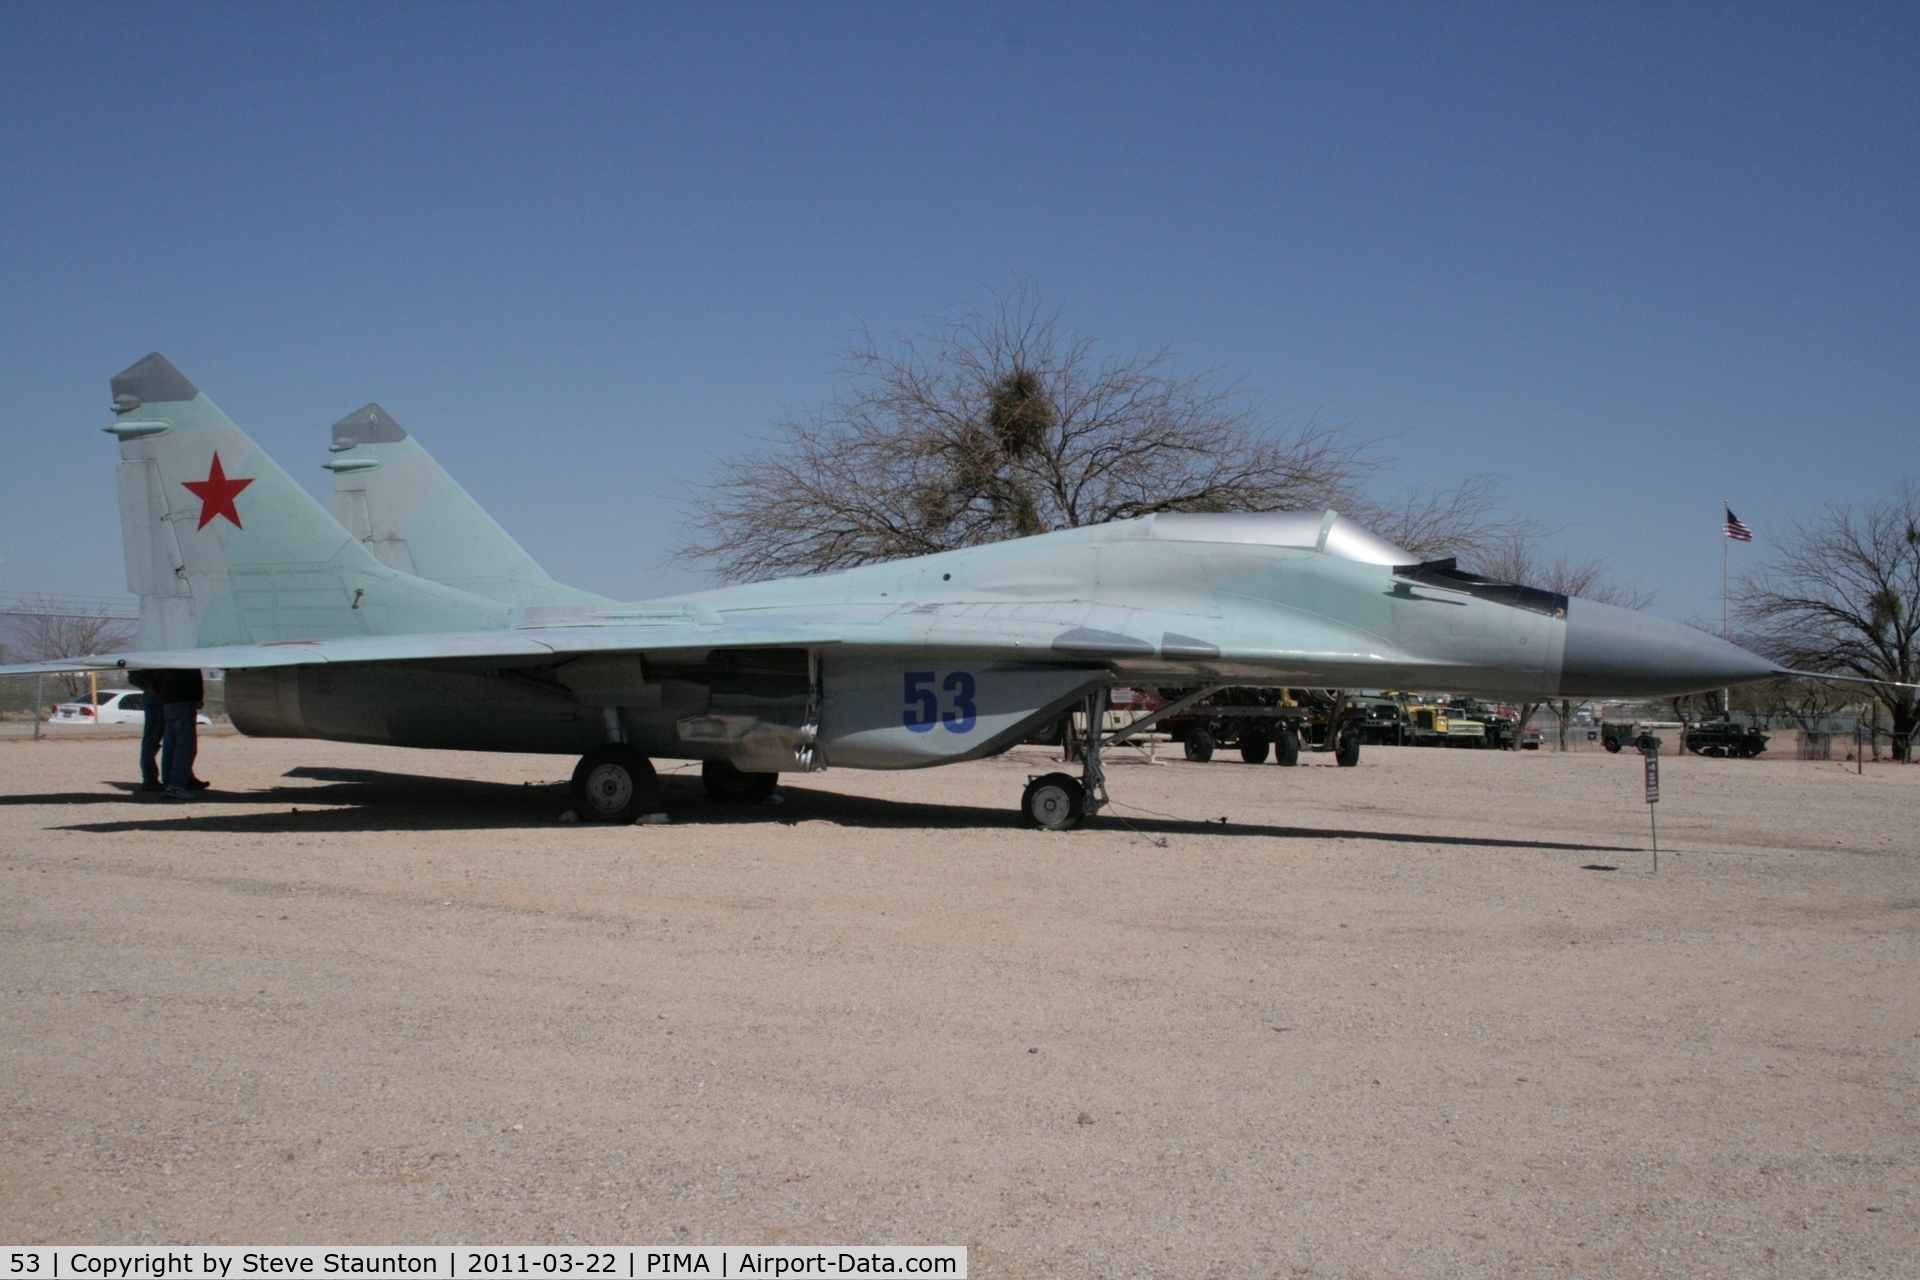 53, Mikoyan-Gurevich MiG-29 C/N 2960516766, Taken at Pima Air and Space Museum, in March 2011 whilst on an Aeroprint Aviation tour